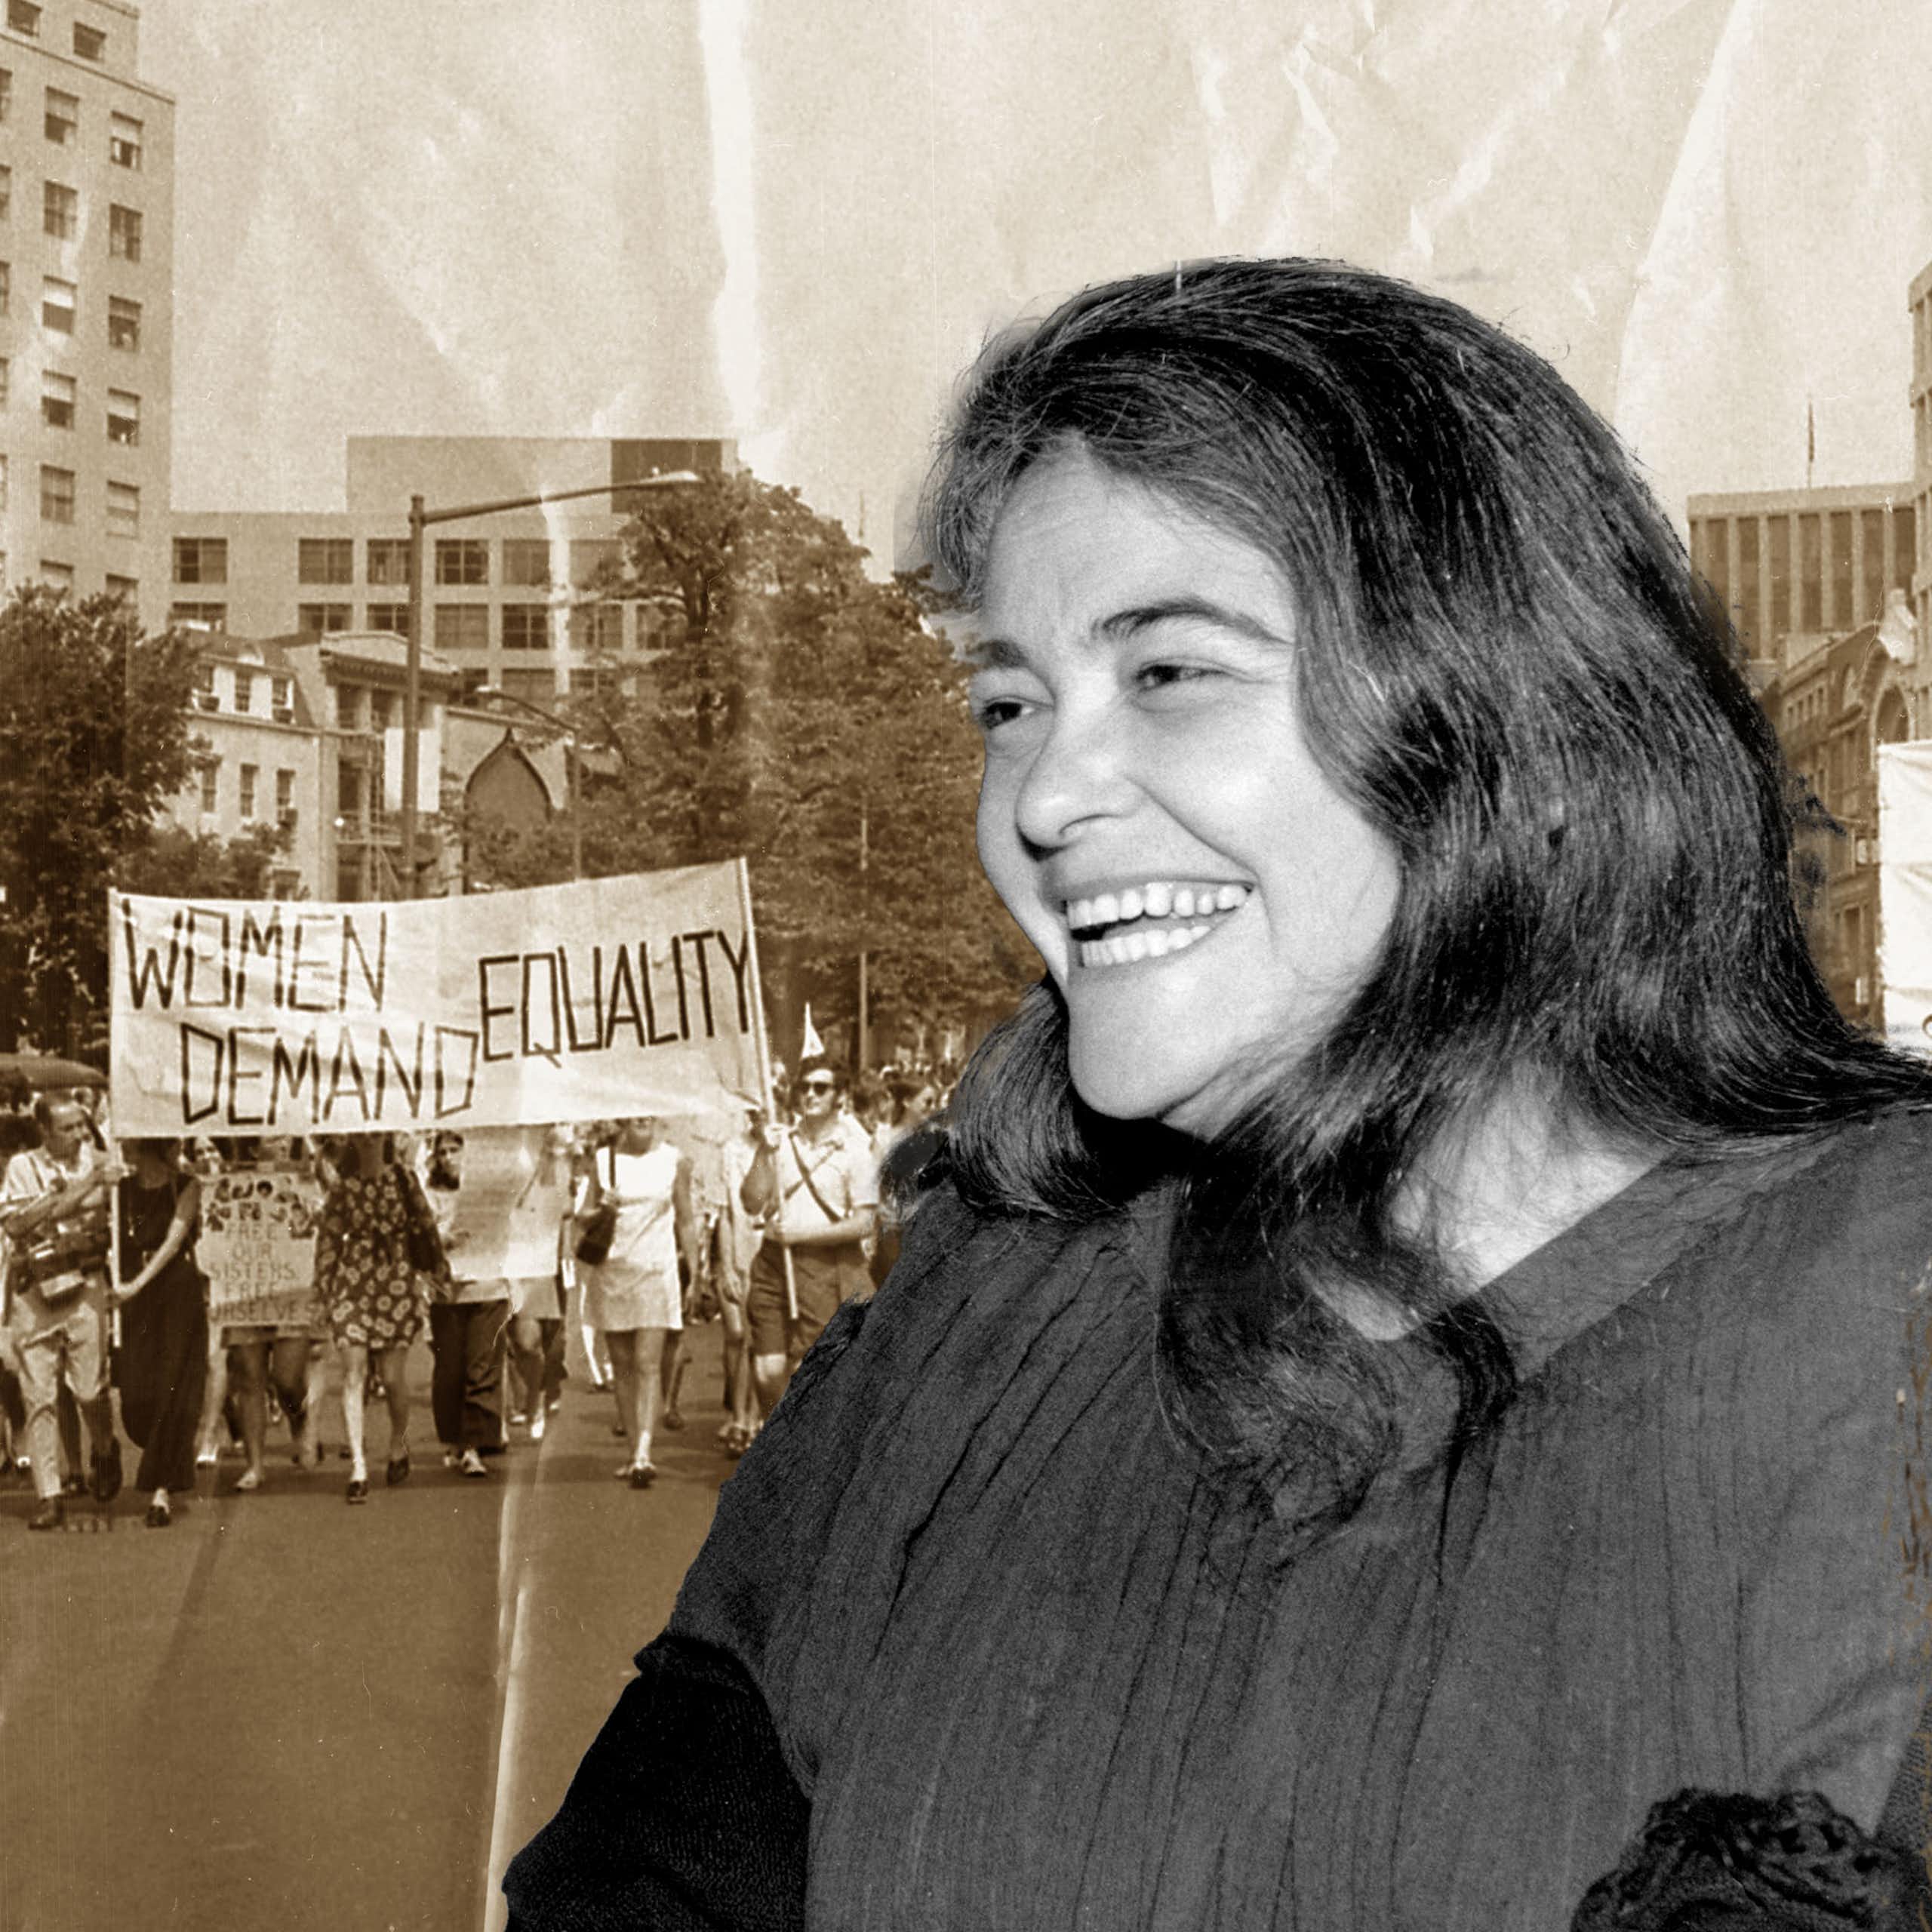 Kate Millett pioneered the term ‘sexual politics’ and explained the links between sex and power. Her book changed my life